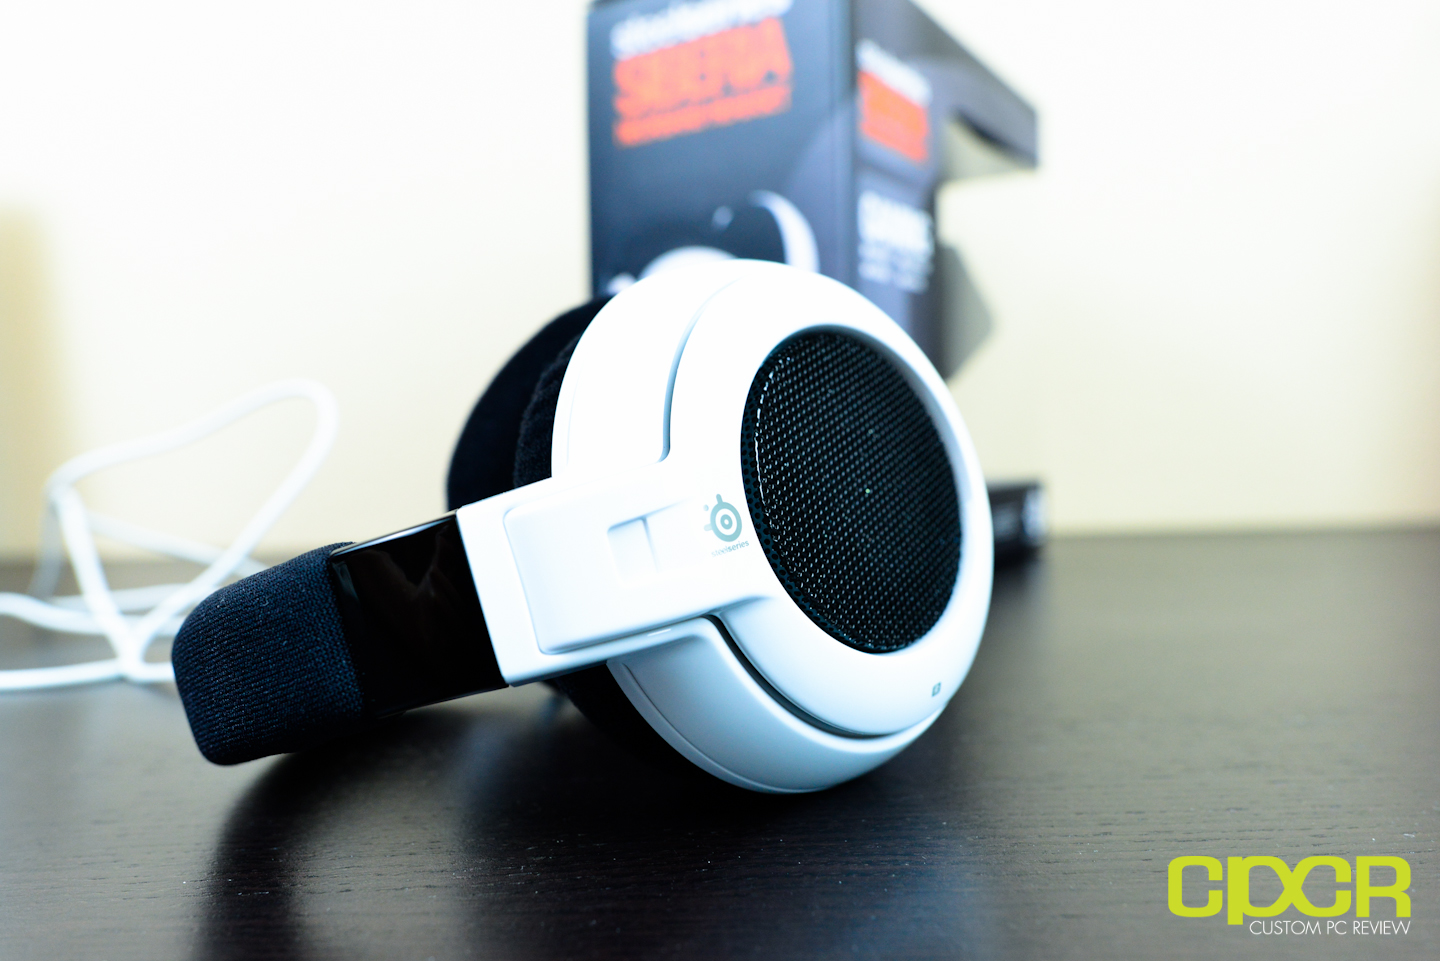 SteelSeries Siberia Neckband Gaming Headset Review